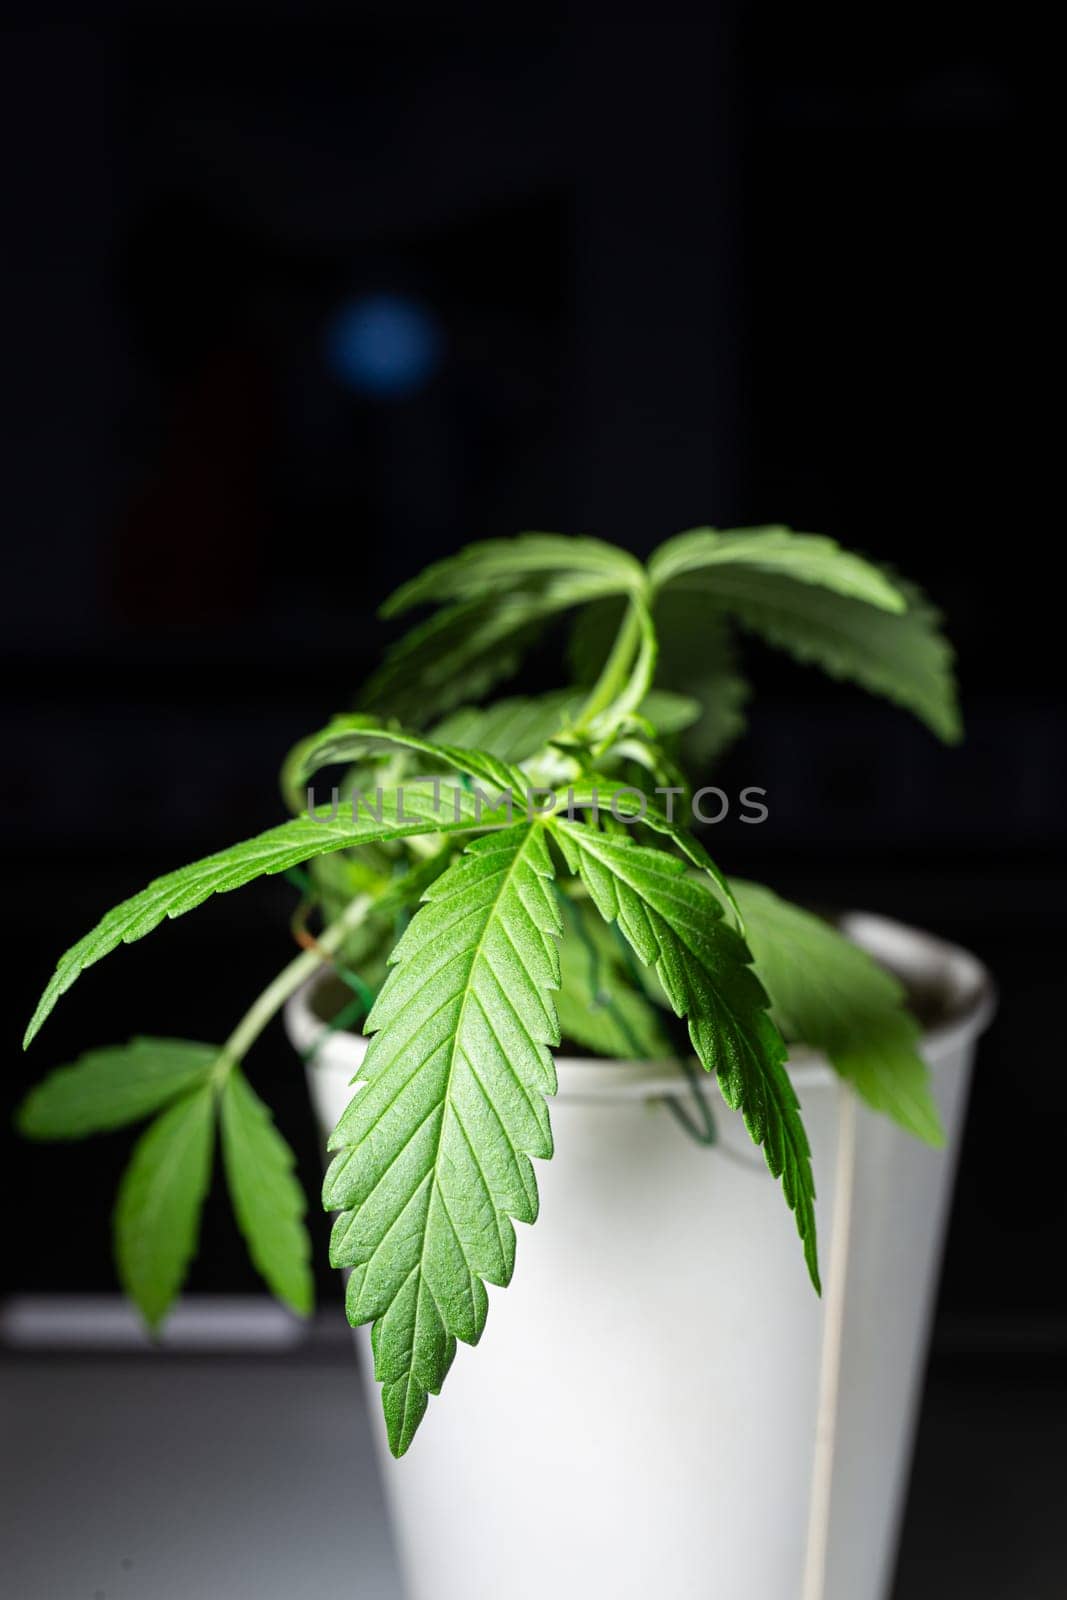 A single cannabis plant isolated on a black background. The plant is in a white plastic pot and has several green leaves.